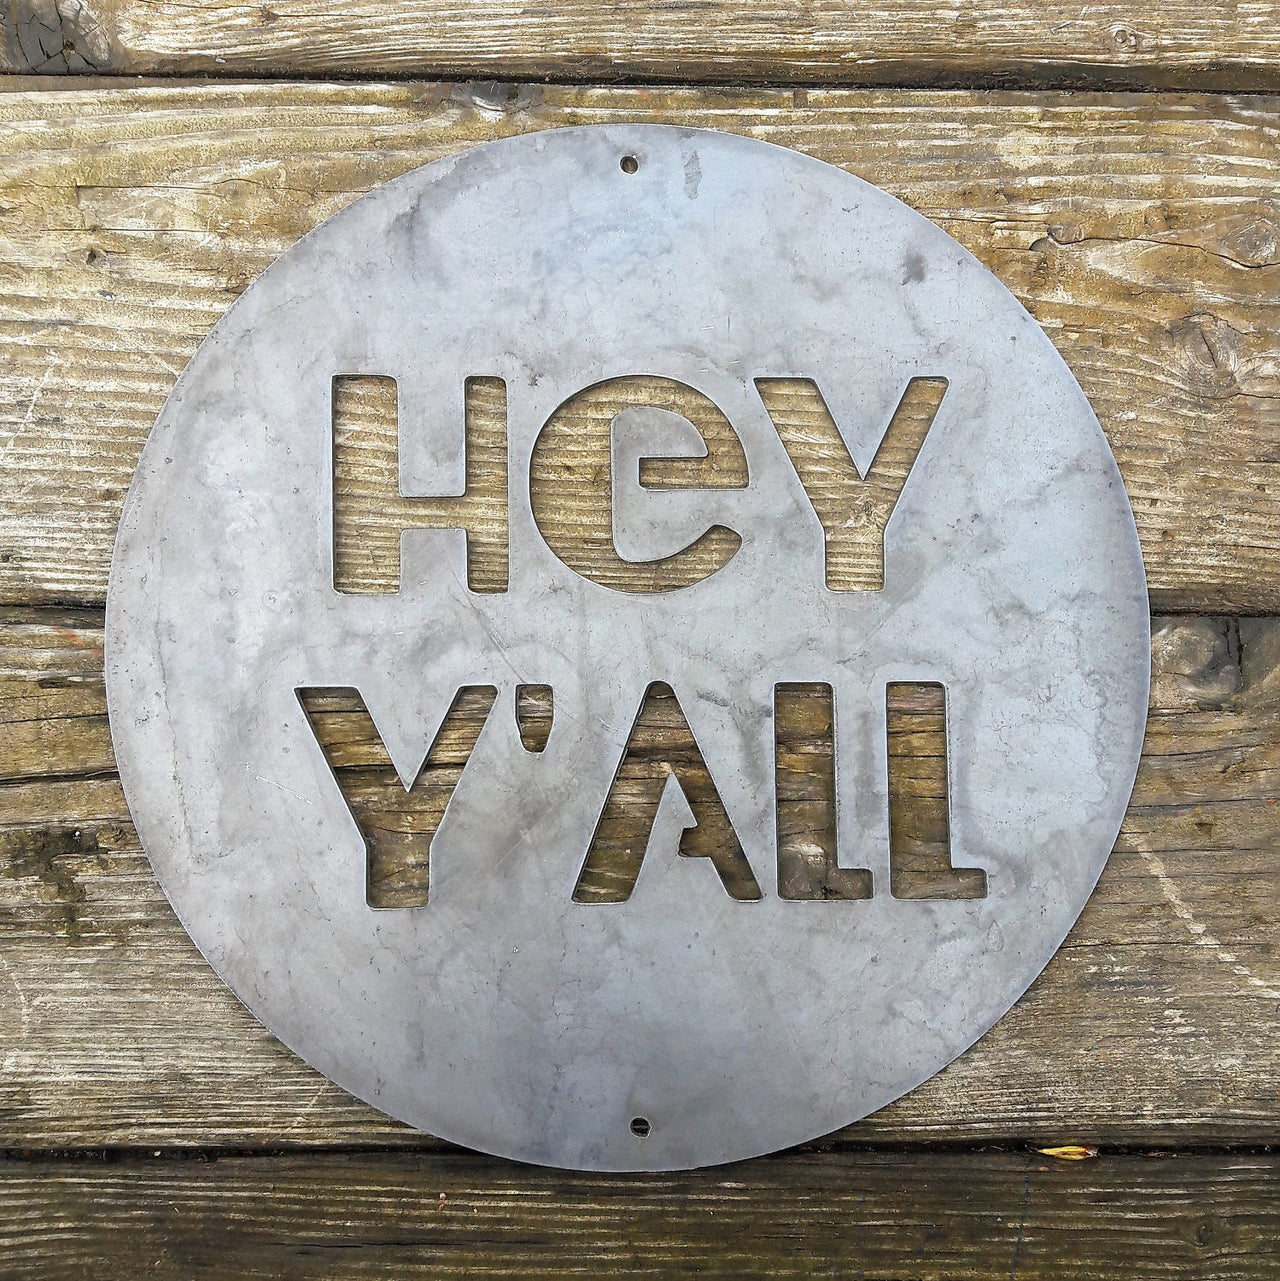 HEY Y'ALL Round Metal Sign - Rustic Wedding Welcome Wall Art - Southern, Country Farmhouse Decor